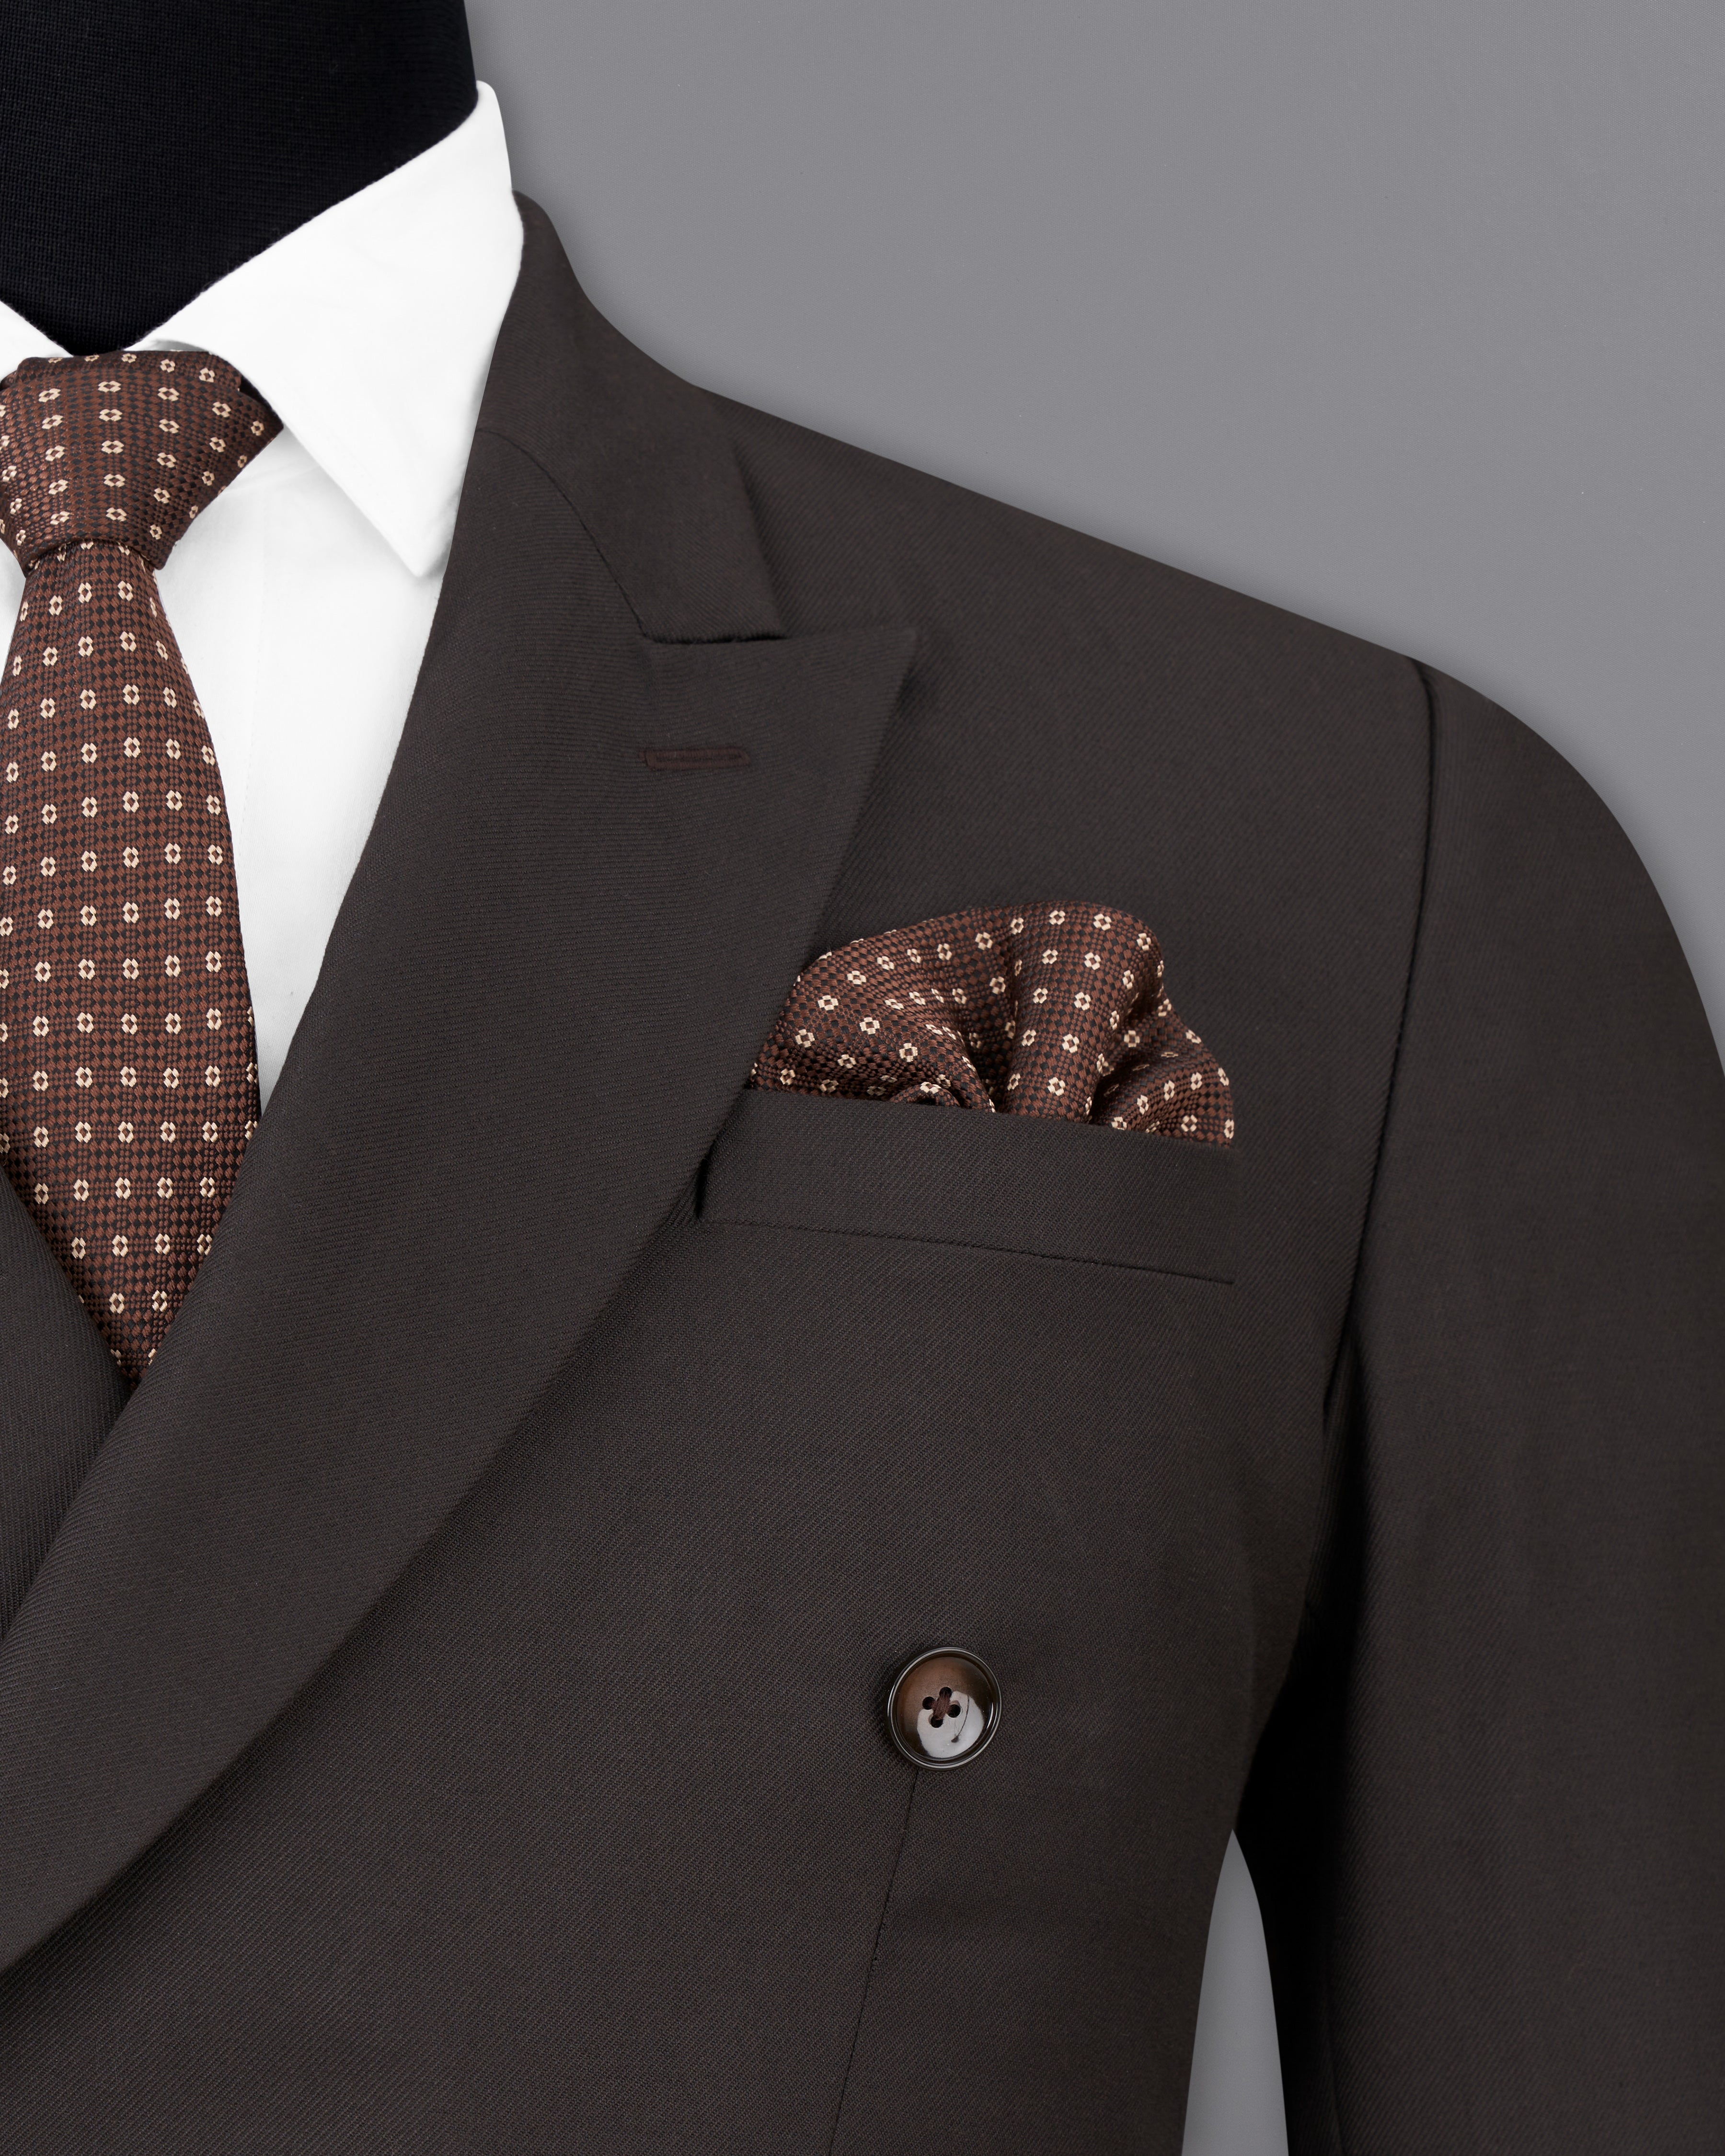 Eclipse Brown Double Breasted Blazer BL2500-DB-36, BL2500-DB-38, BL2500-DB-40, BL2500-DB-42, BL2500-DB-44, BL2500-DB-46, BL2500-DB-48, BL2500-DB-50, BL2500-DB-52, BL2500-DB-54, BL2500-DB-56, BL2500-DB-58, BL2500-DB-60